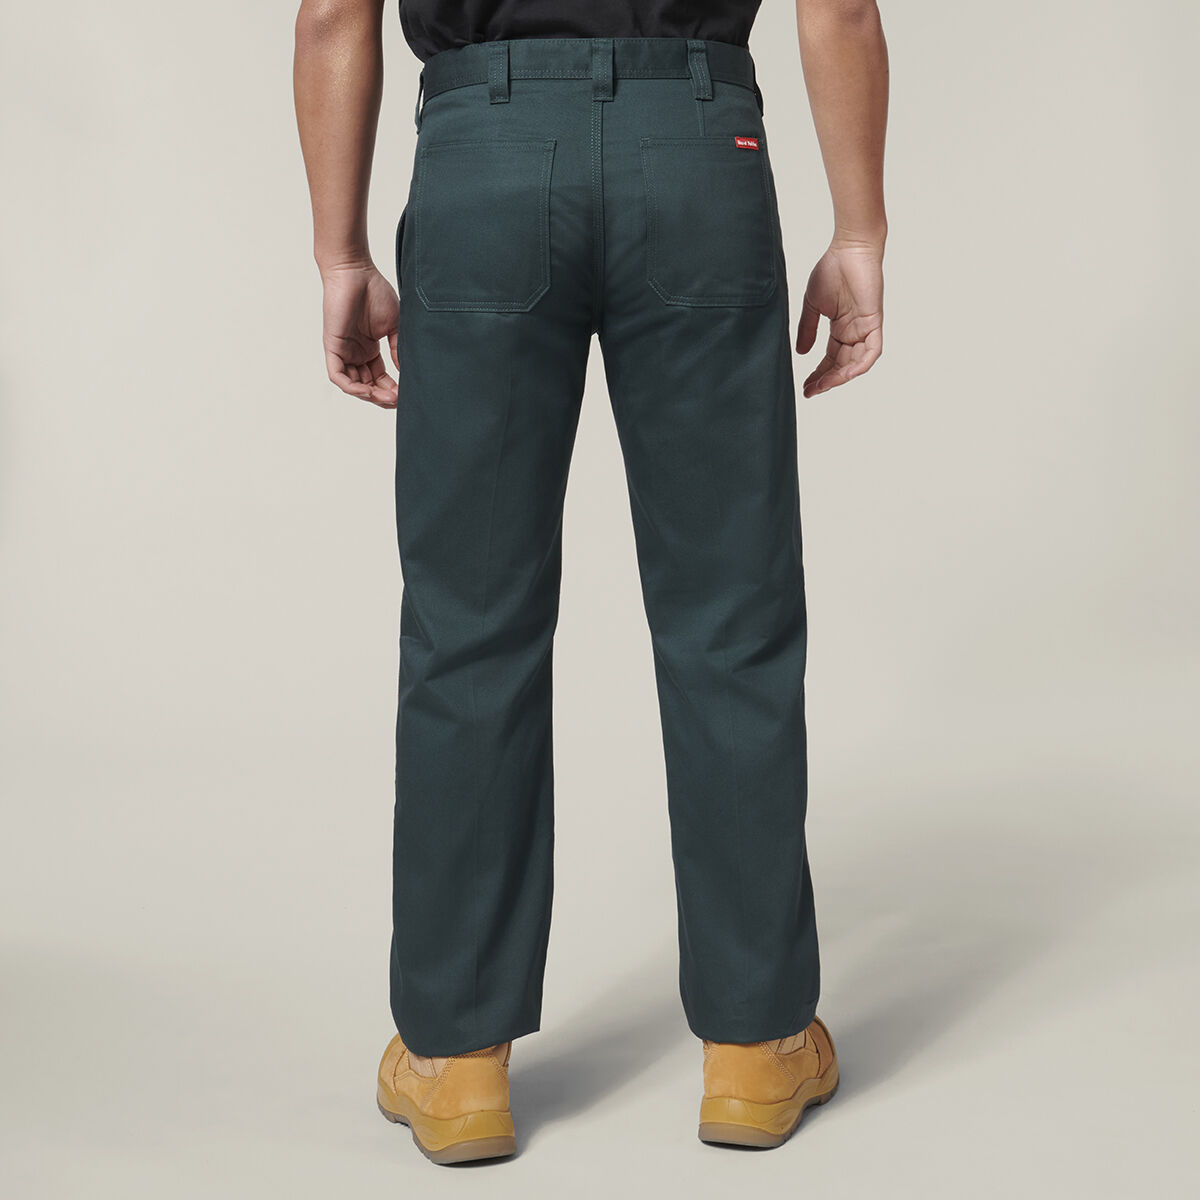 HARD YAKKA FOUNDATIONS DRILL CARGO PANT WITH TAPE - Ausworkwear & Safety